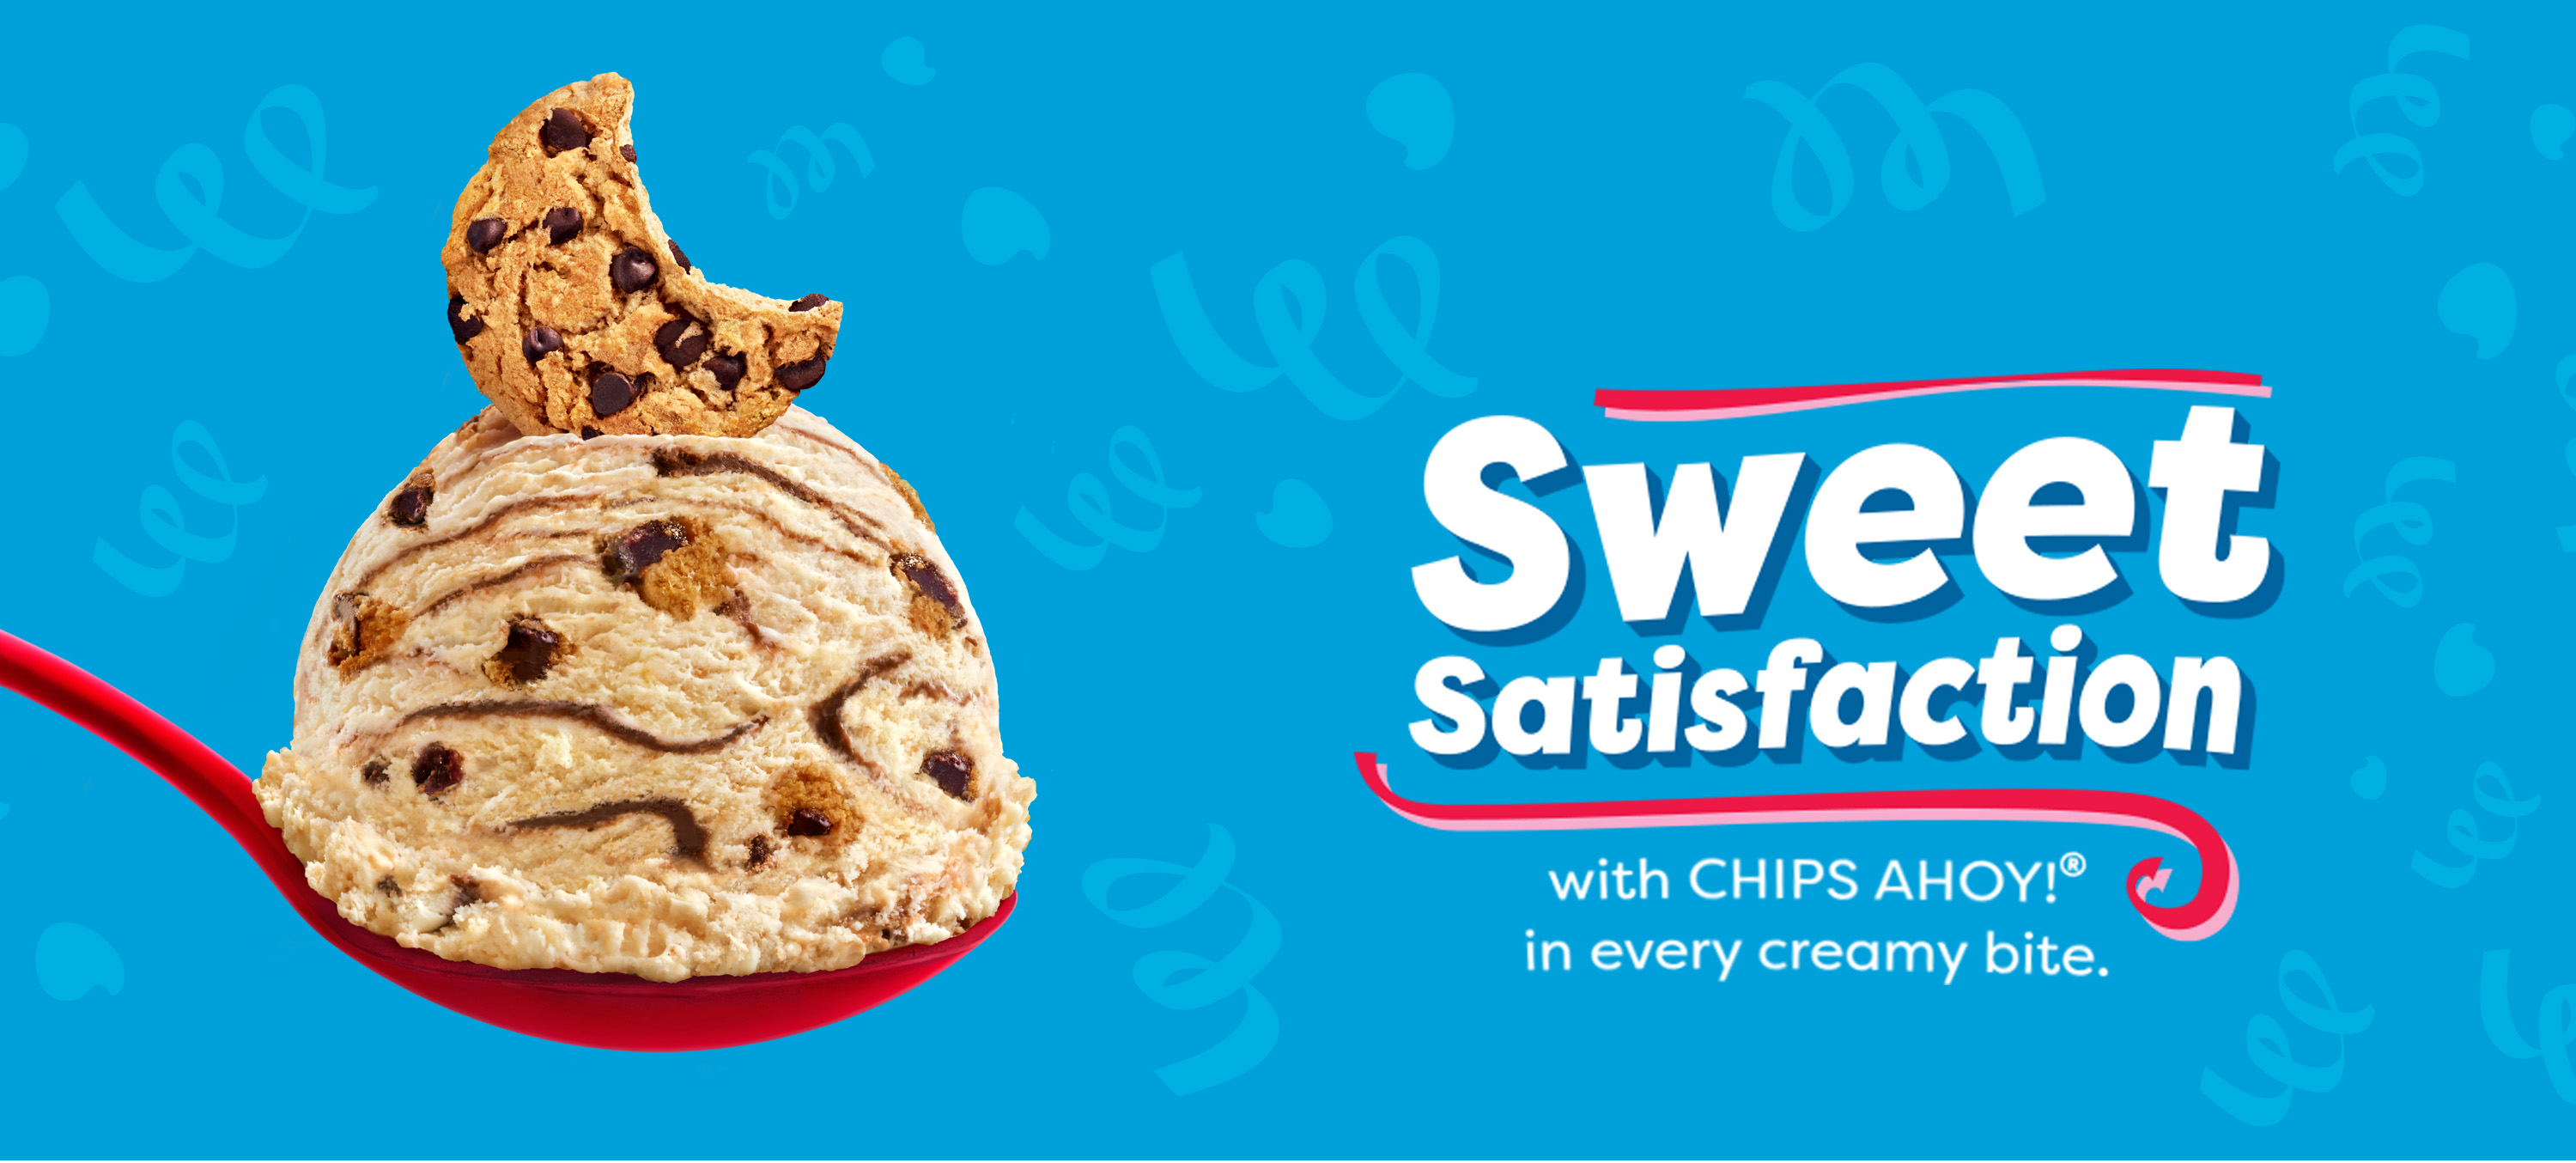 Chips Ahoy sweet satisfaction about us banner